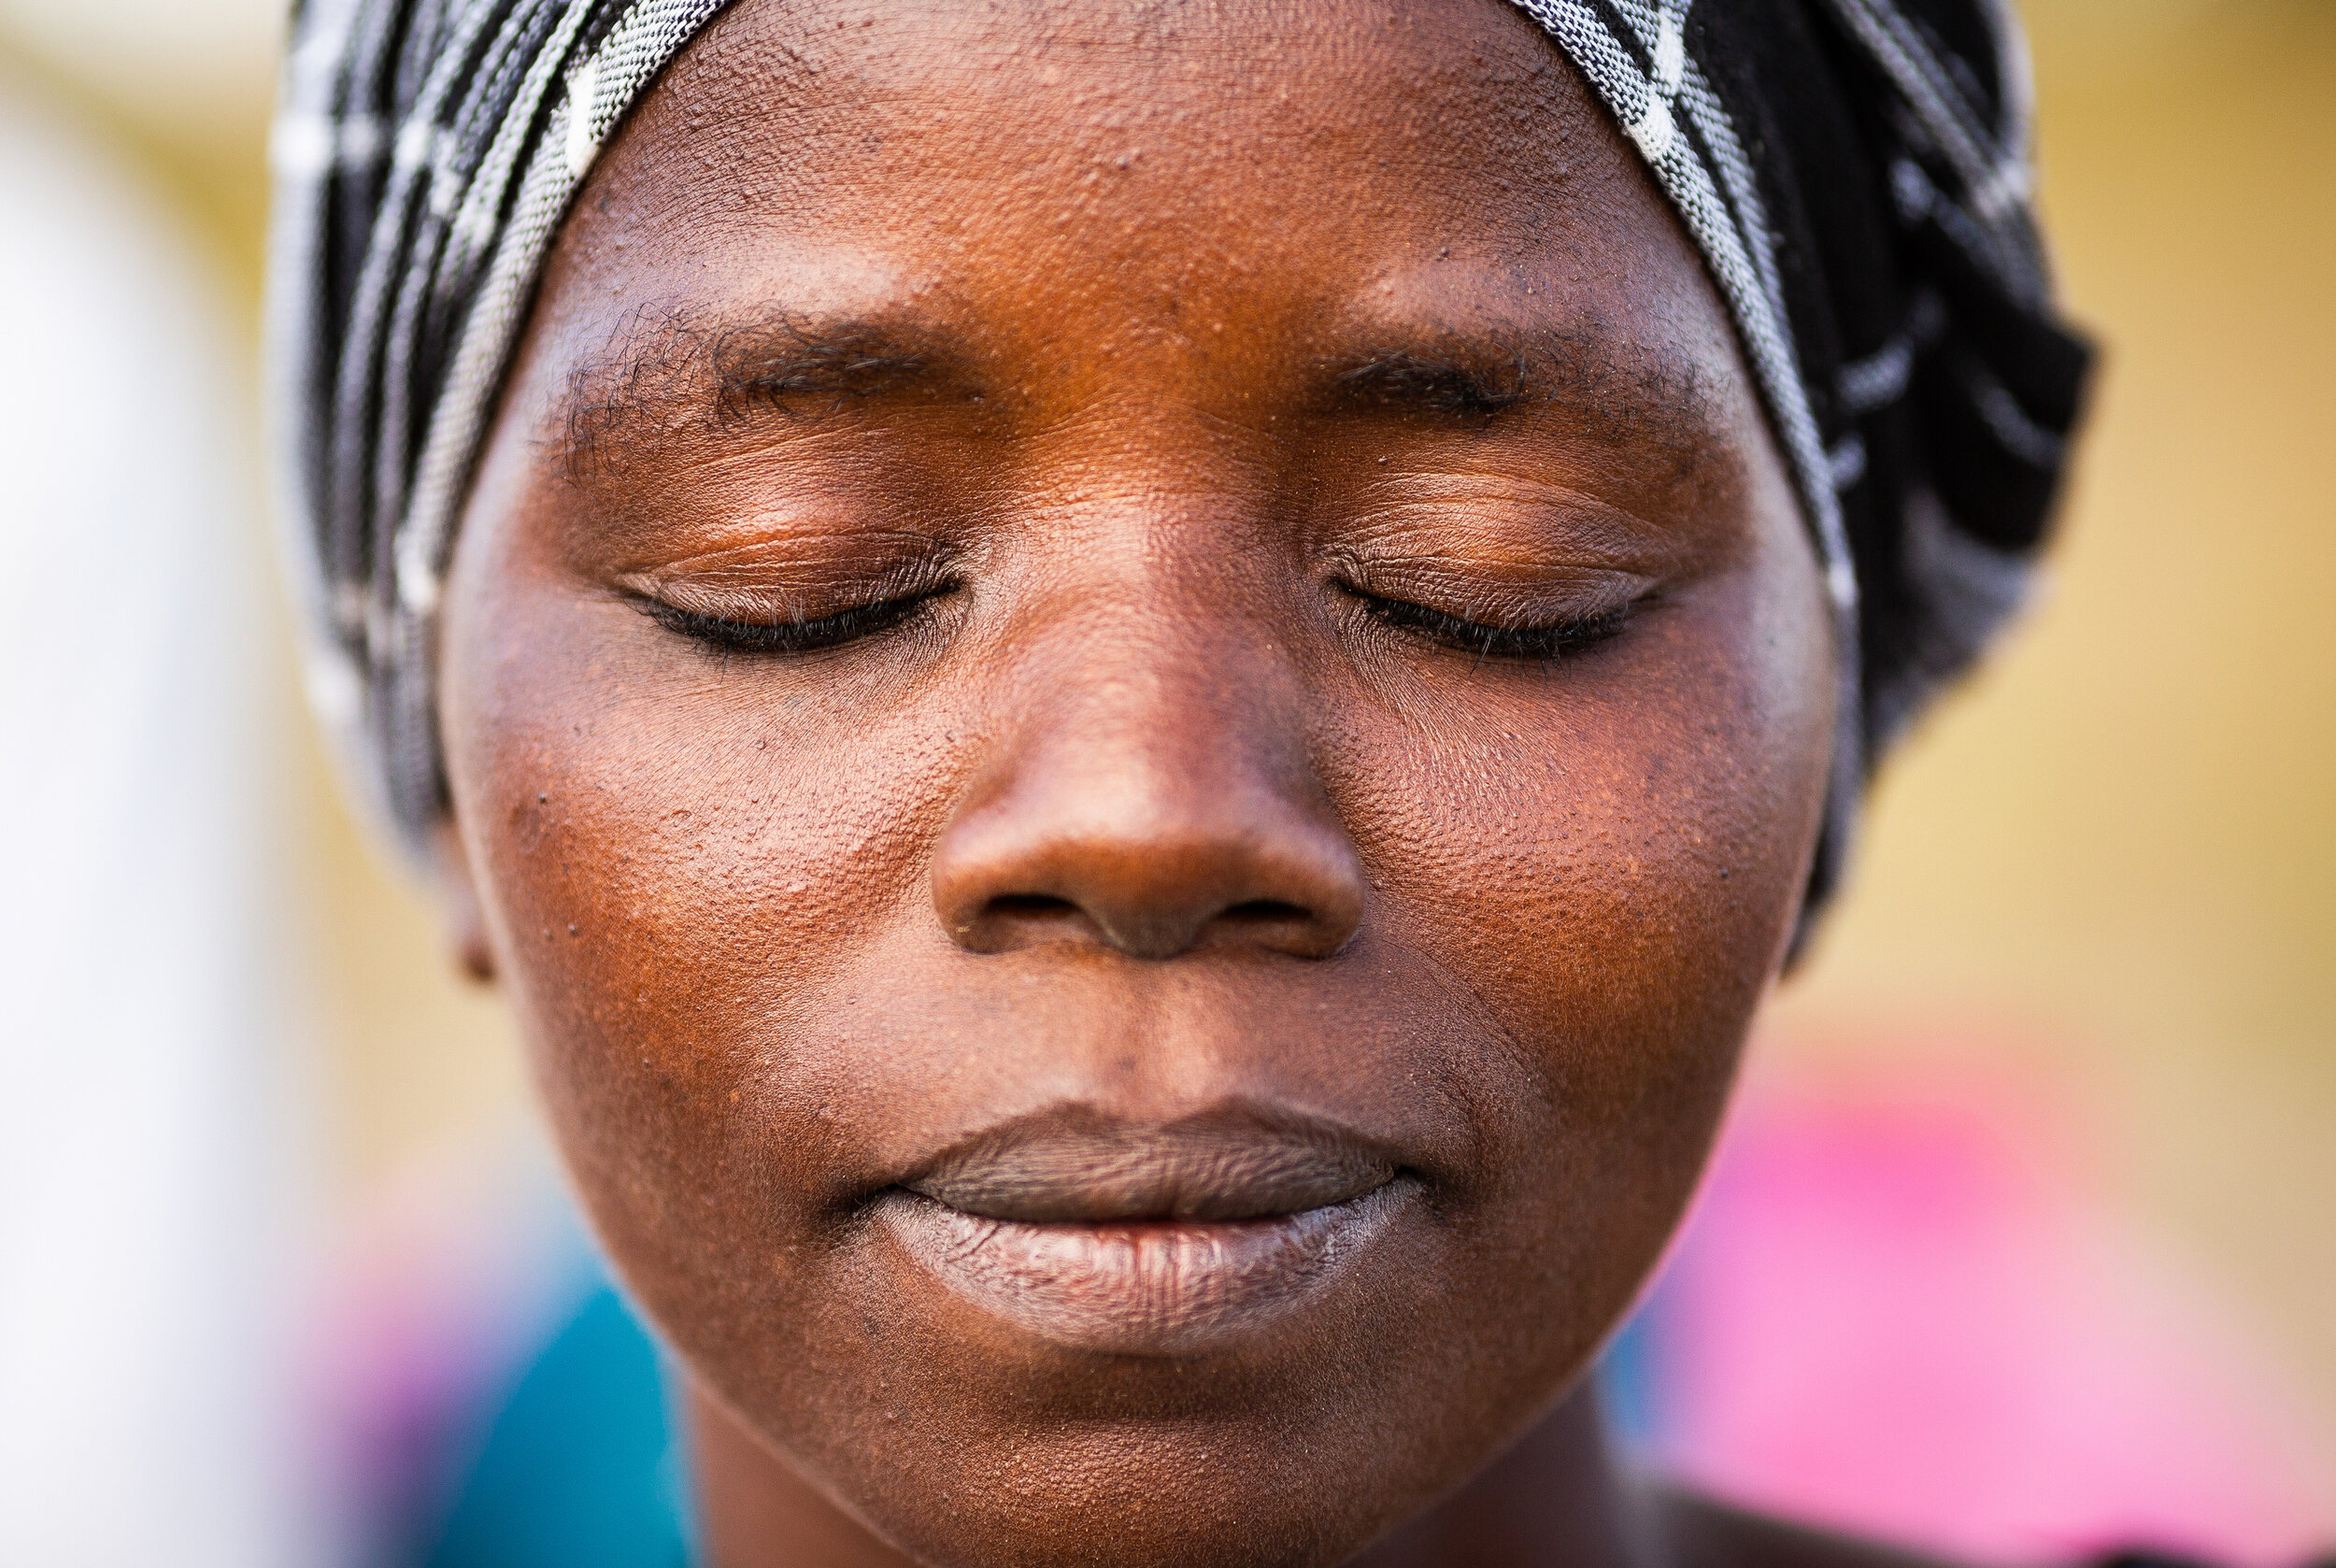 Malawi_Woman_Face_2019_JF_LowRes.jpg